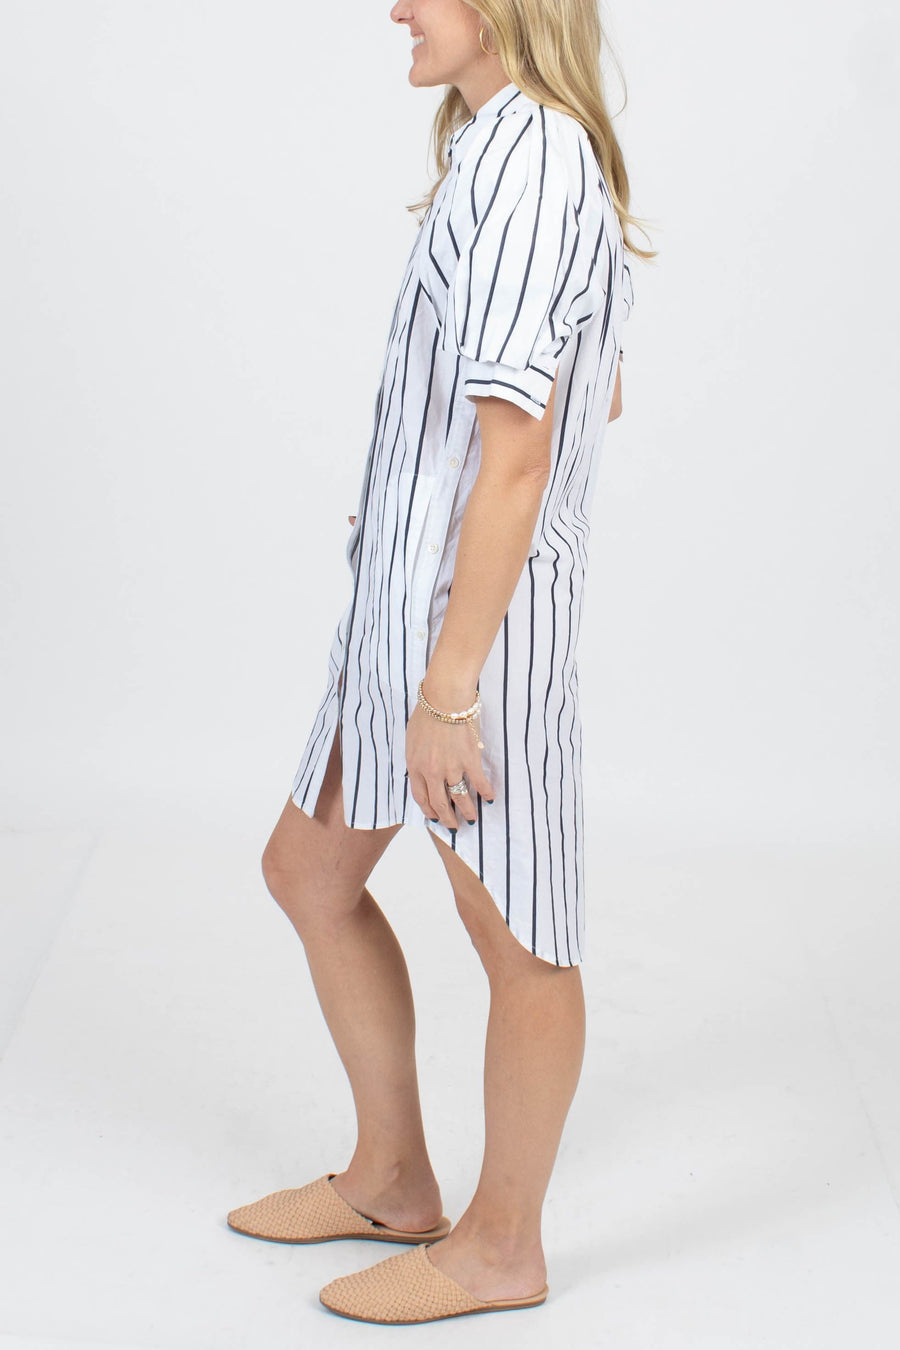 Joie Clothing XS Cotton Striped Dress